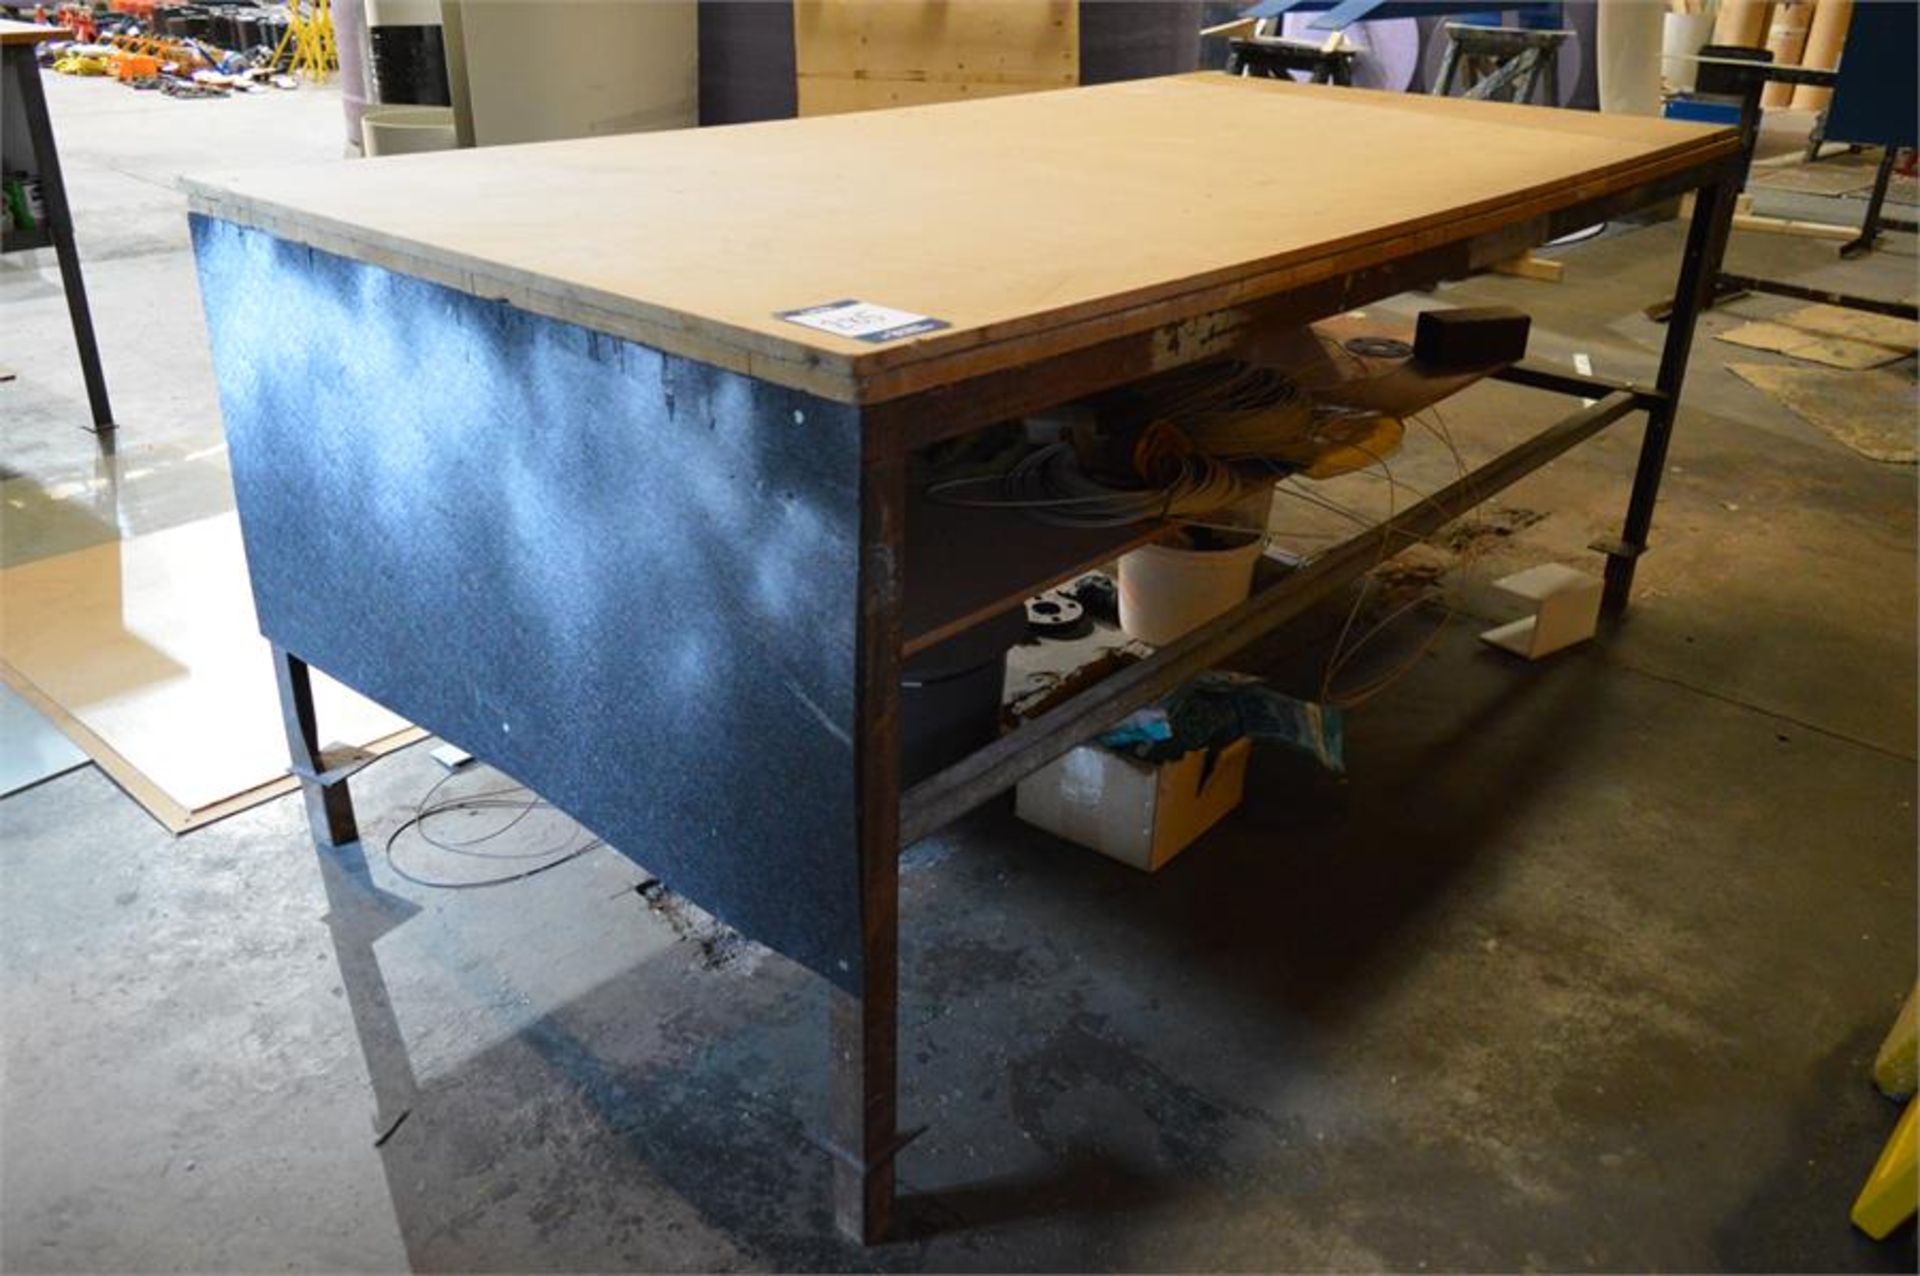 Steel framed wooden topped fabricated workbench, 2.44m x 1.22m x 1.01m (H), (contents not included)